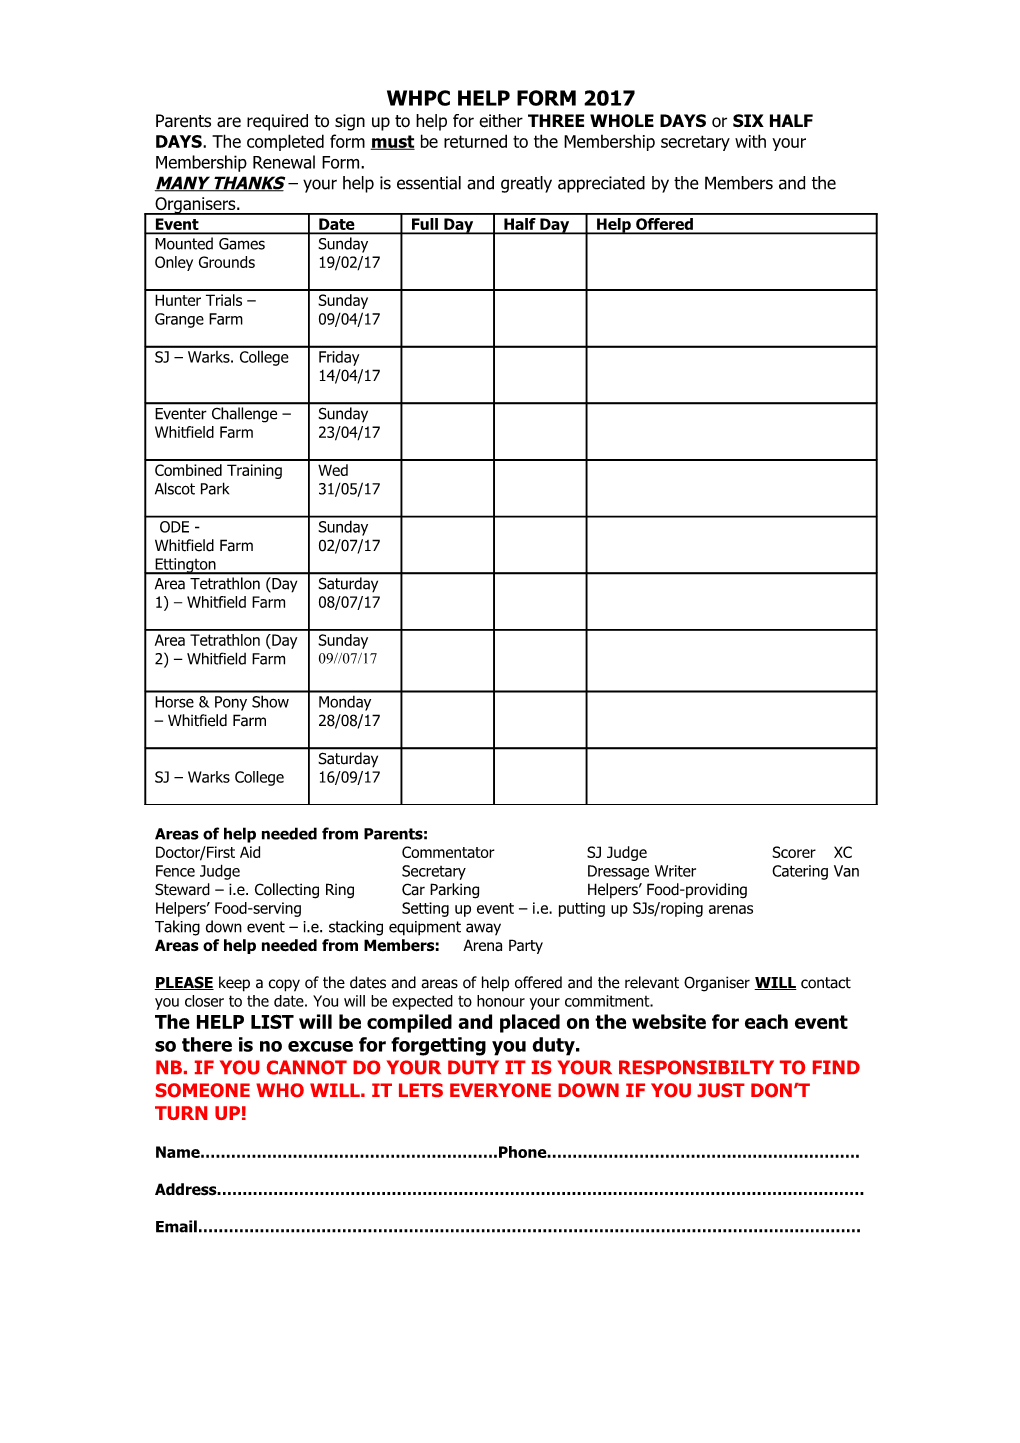 Whpc Help Form 2005